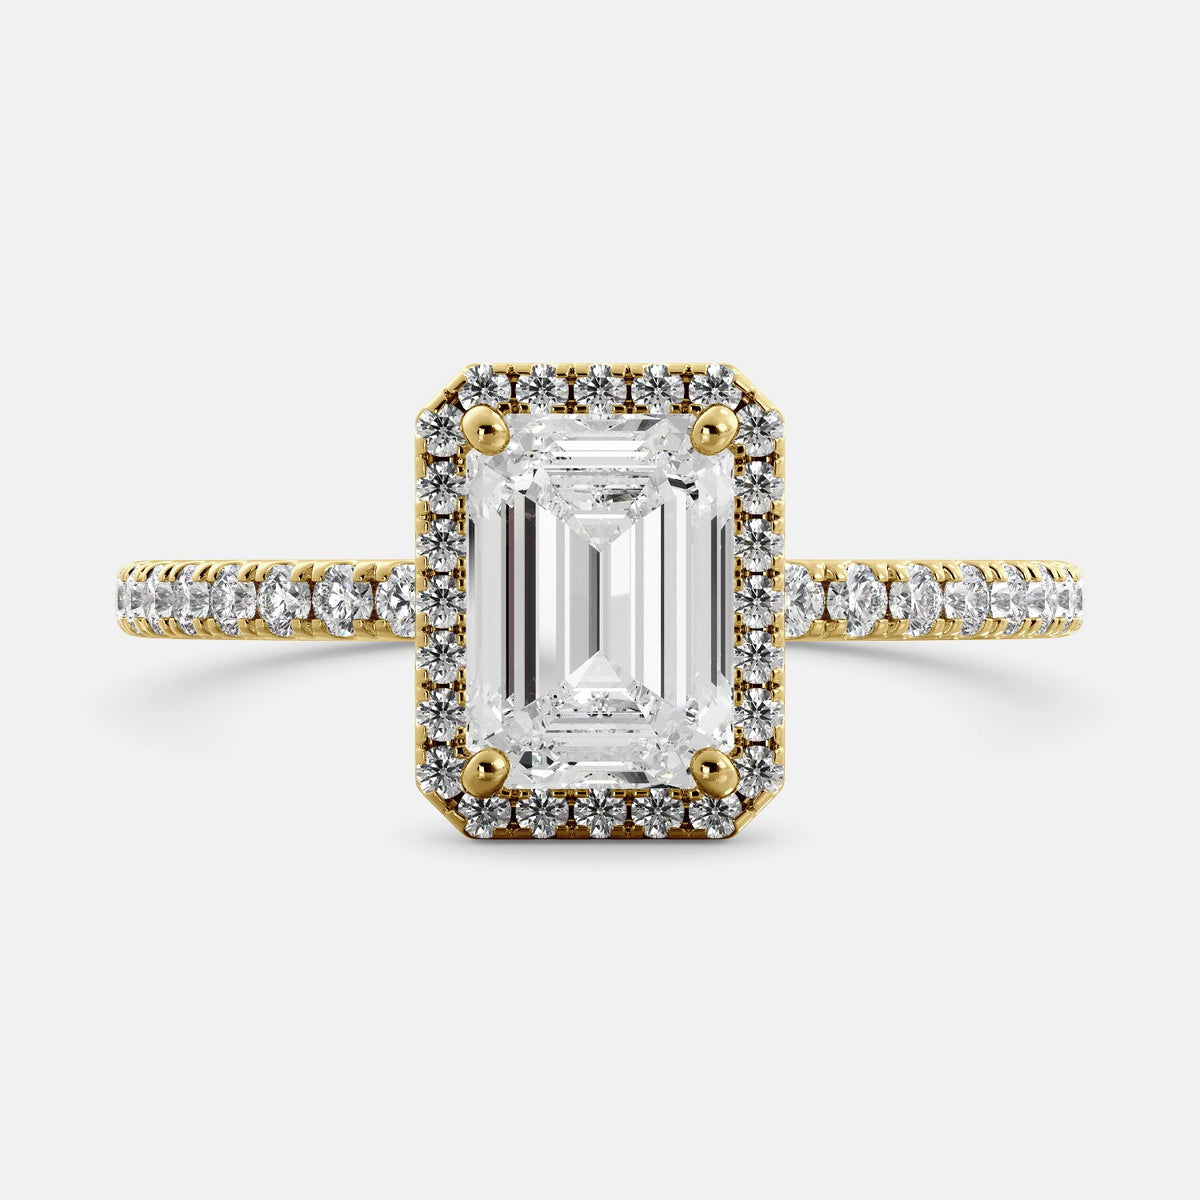 This image shows a stunning emerald halo lab-grown diamond ring with pavé on a yellow gold band. The ring features a 1.5-carat emerald-cut lab-grown diamond in the center, surrounded by a halo of smaller lab-grown diamonds. The ring is made of 14k yellow gold and is available in a variety of sizes.